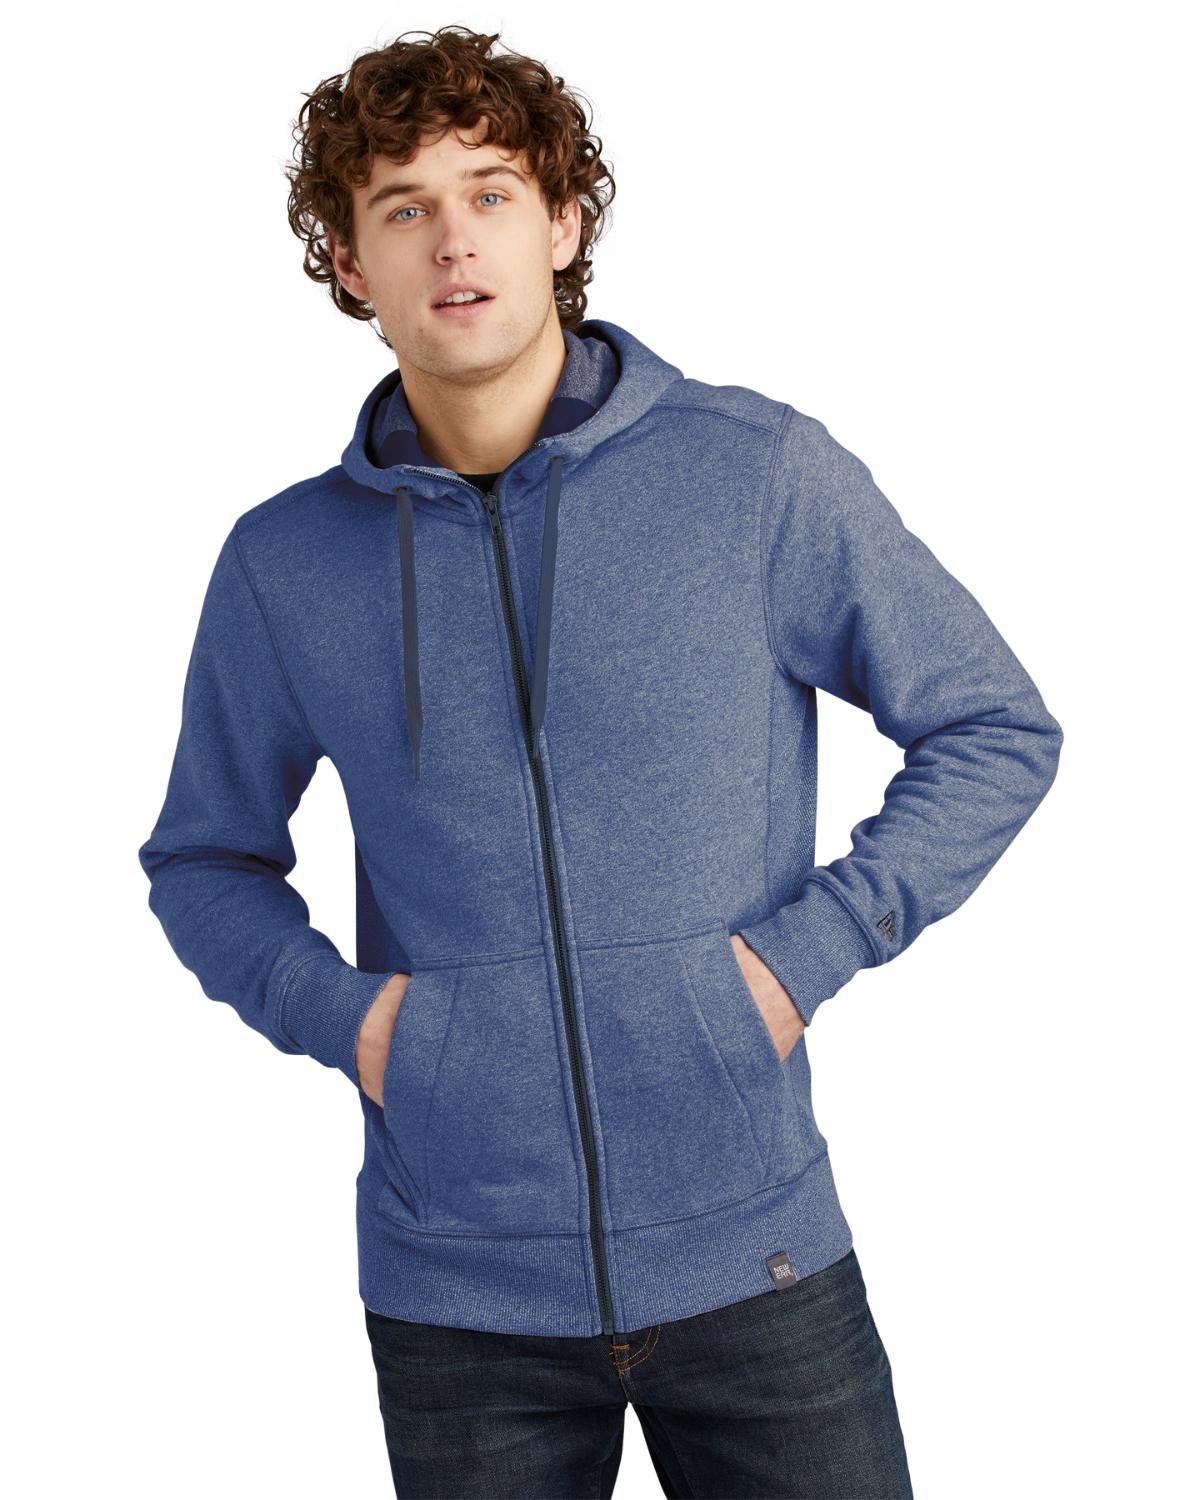 Size Chart for New Era NEA502 Mens French Terry Full Zip Hoodie 